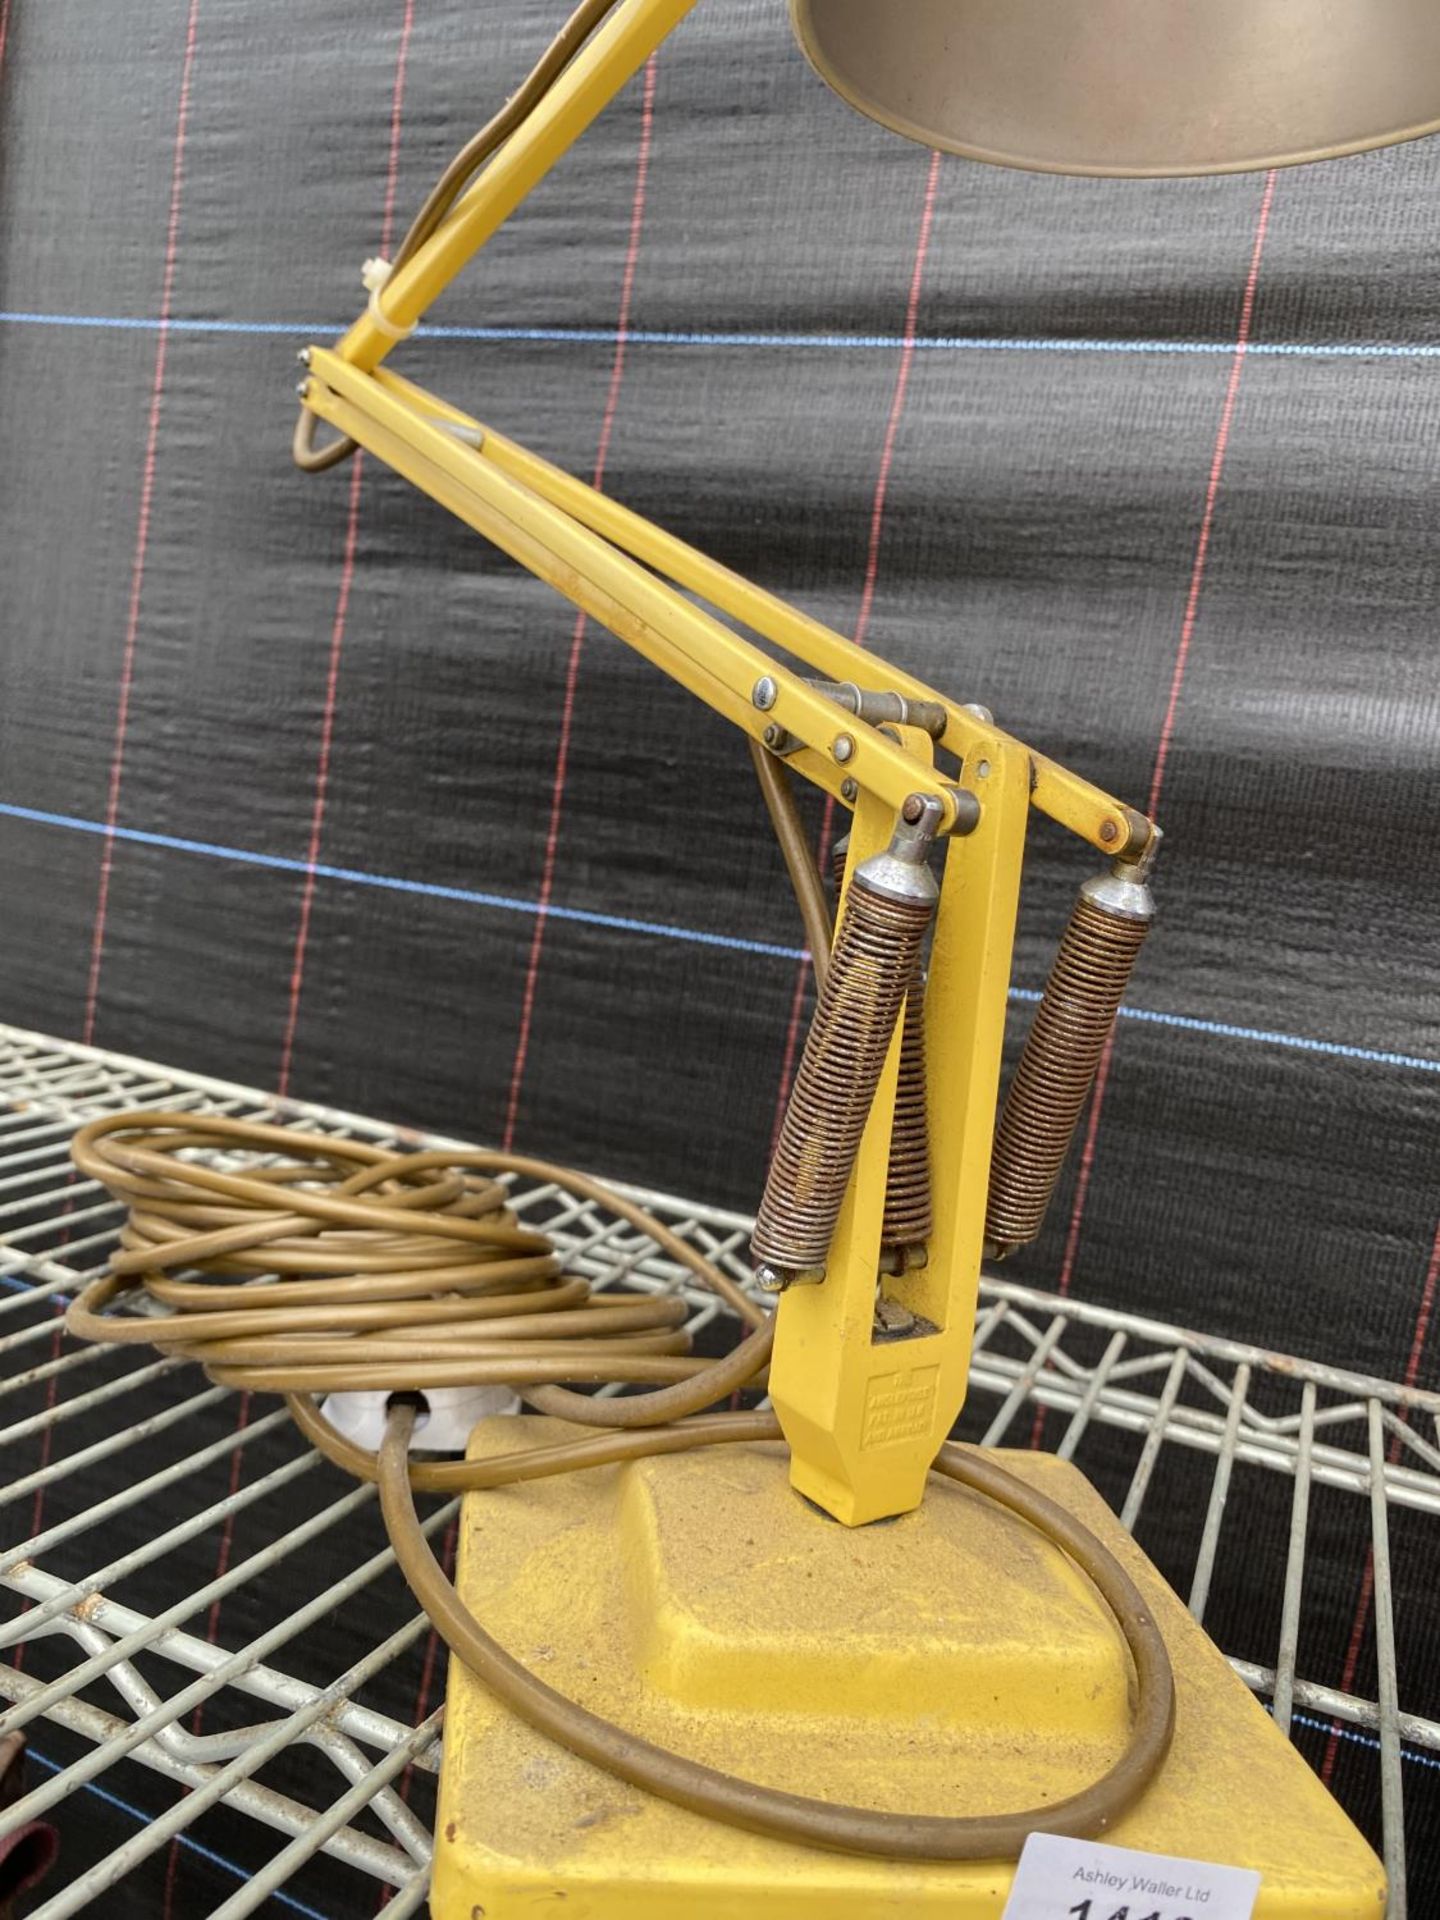 A RETRO MID CENTURY YELLOW HERBERT TERRY ANGLE POISE LAMP - Image 2 of 4